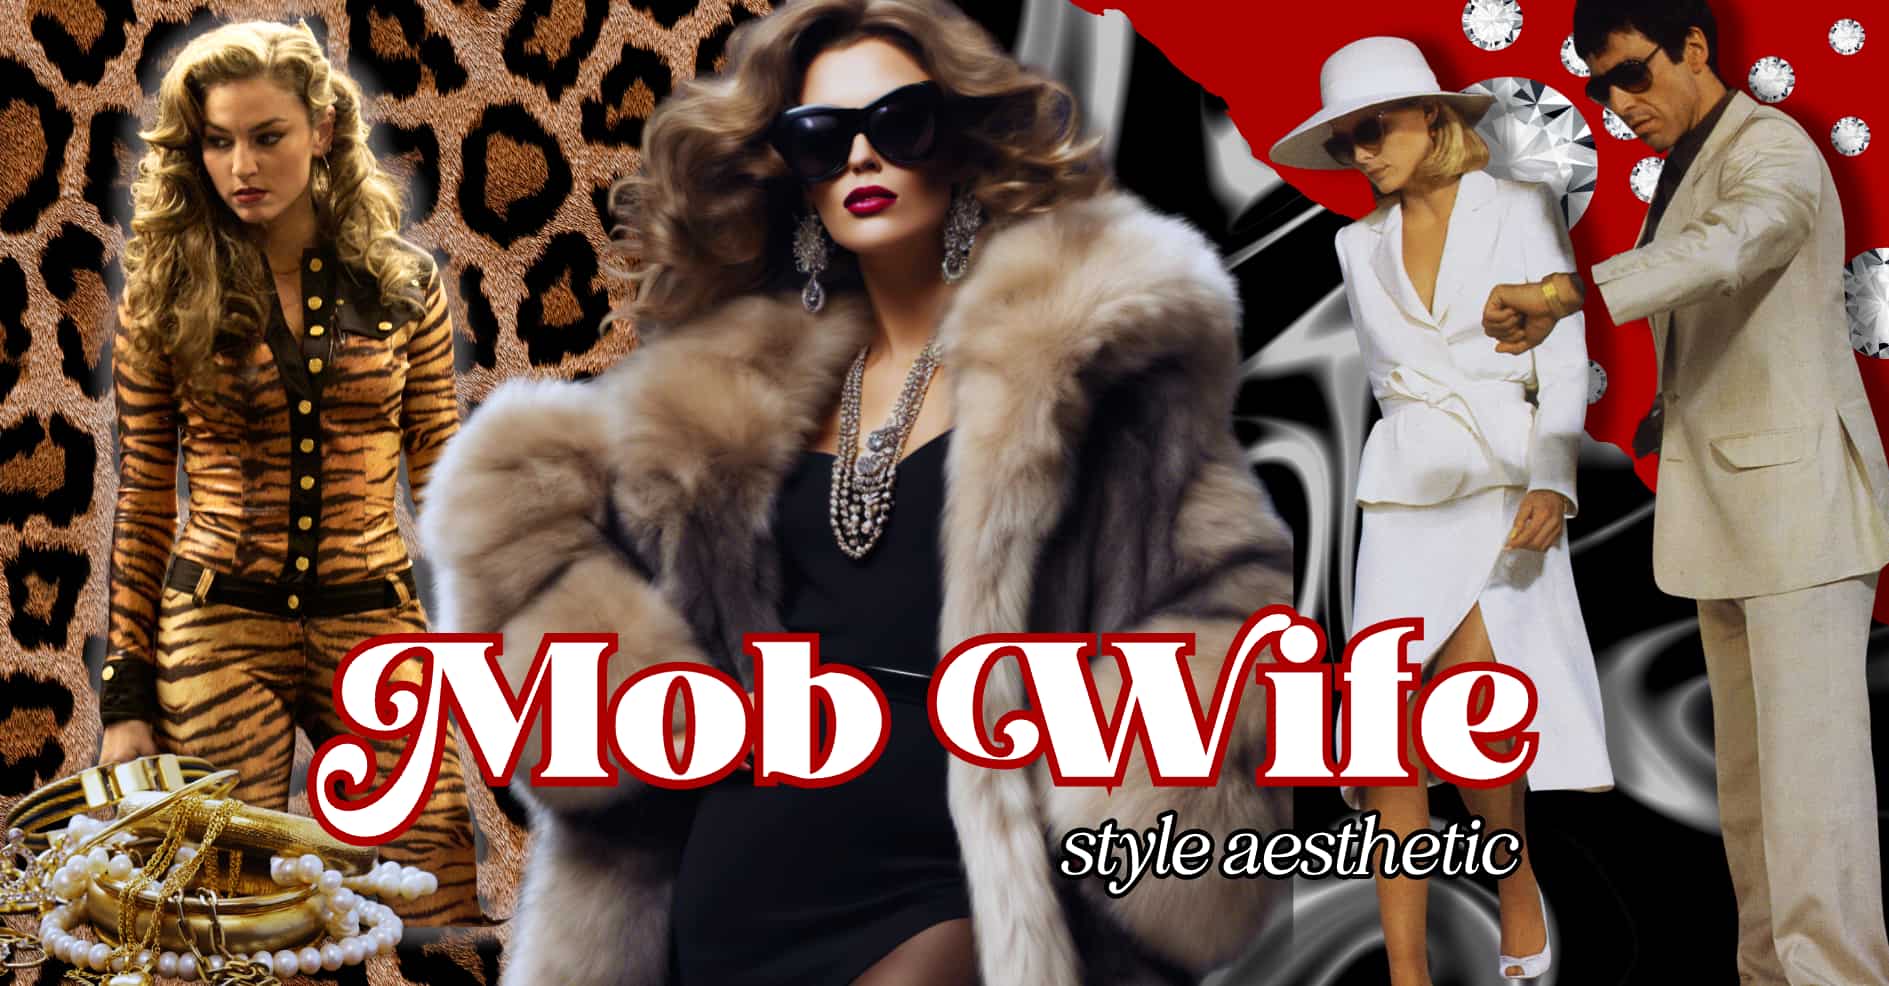 Mob Wife Aesthetic' fashion trend takes over: 'sexiness, opulence